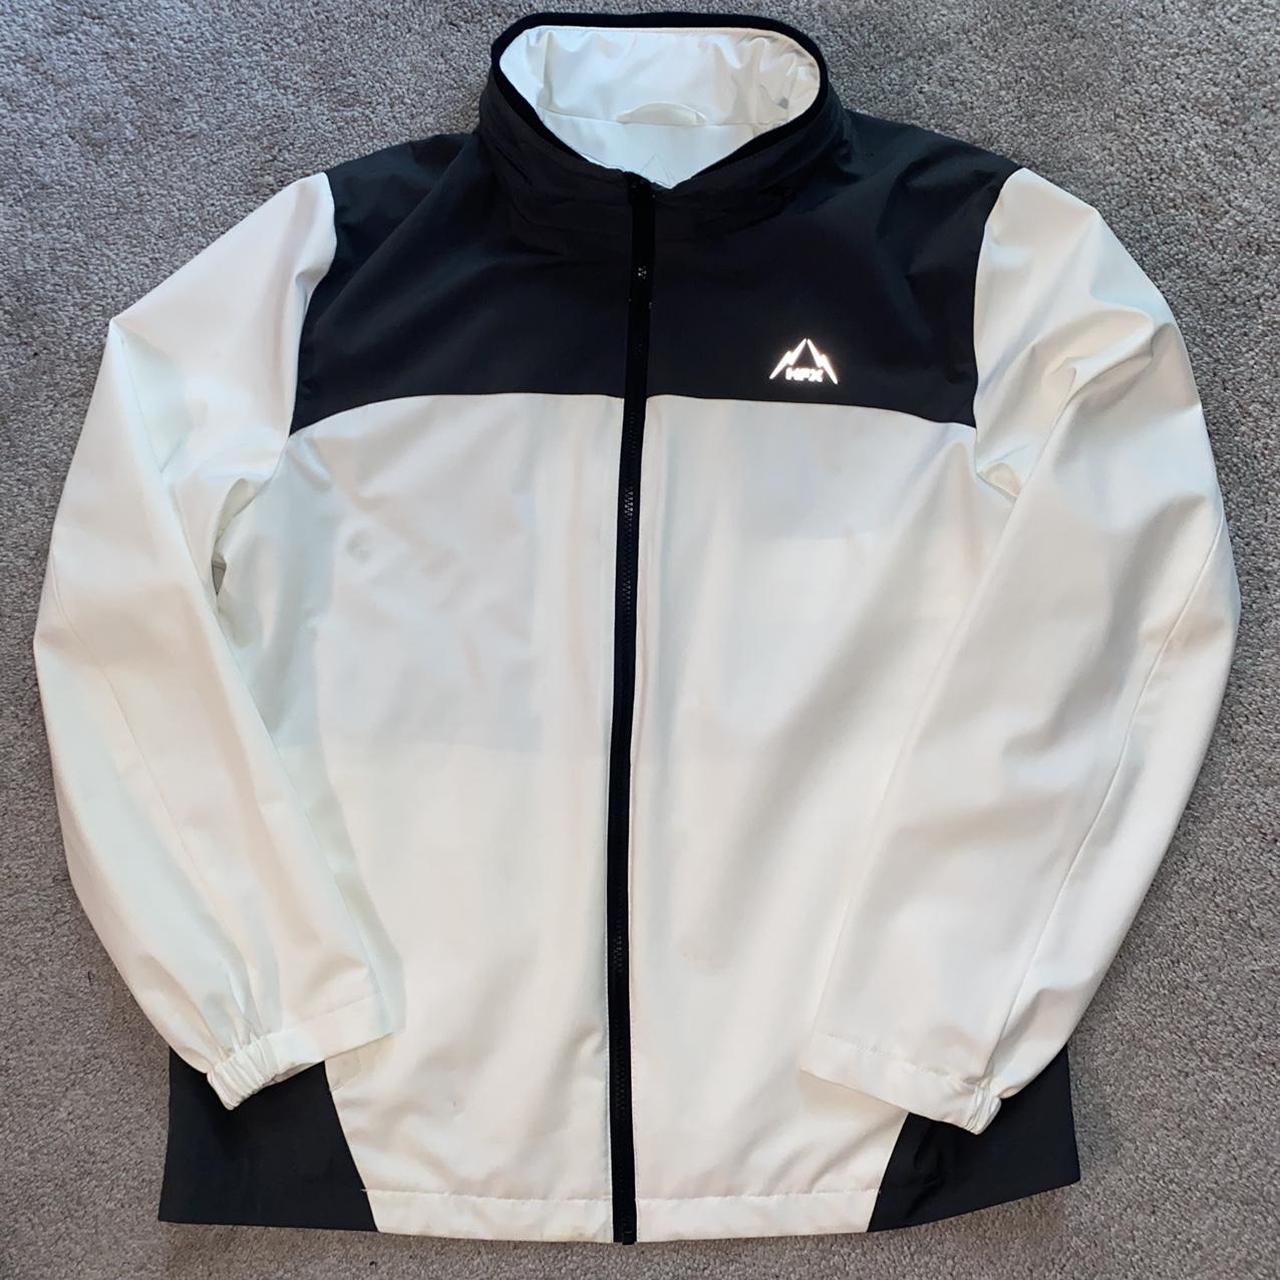 HFX Men's White and Grey Jacket